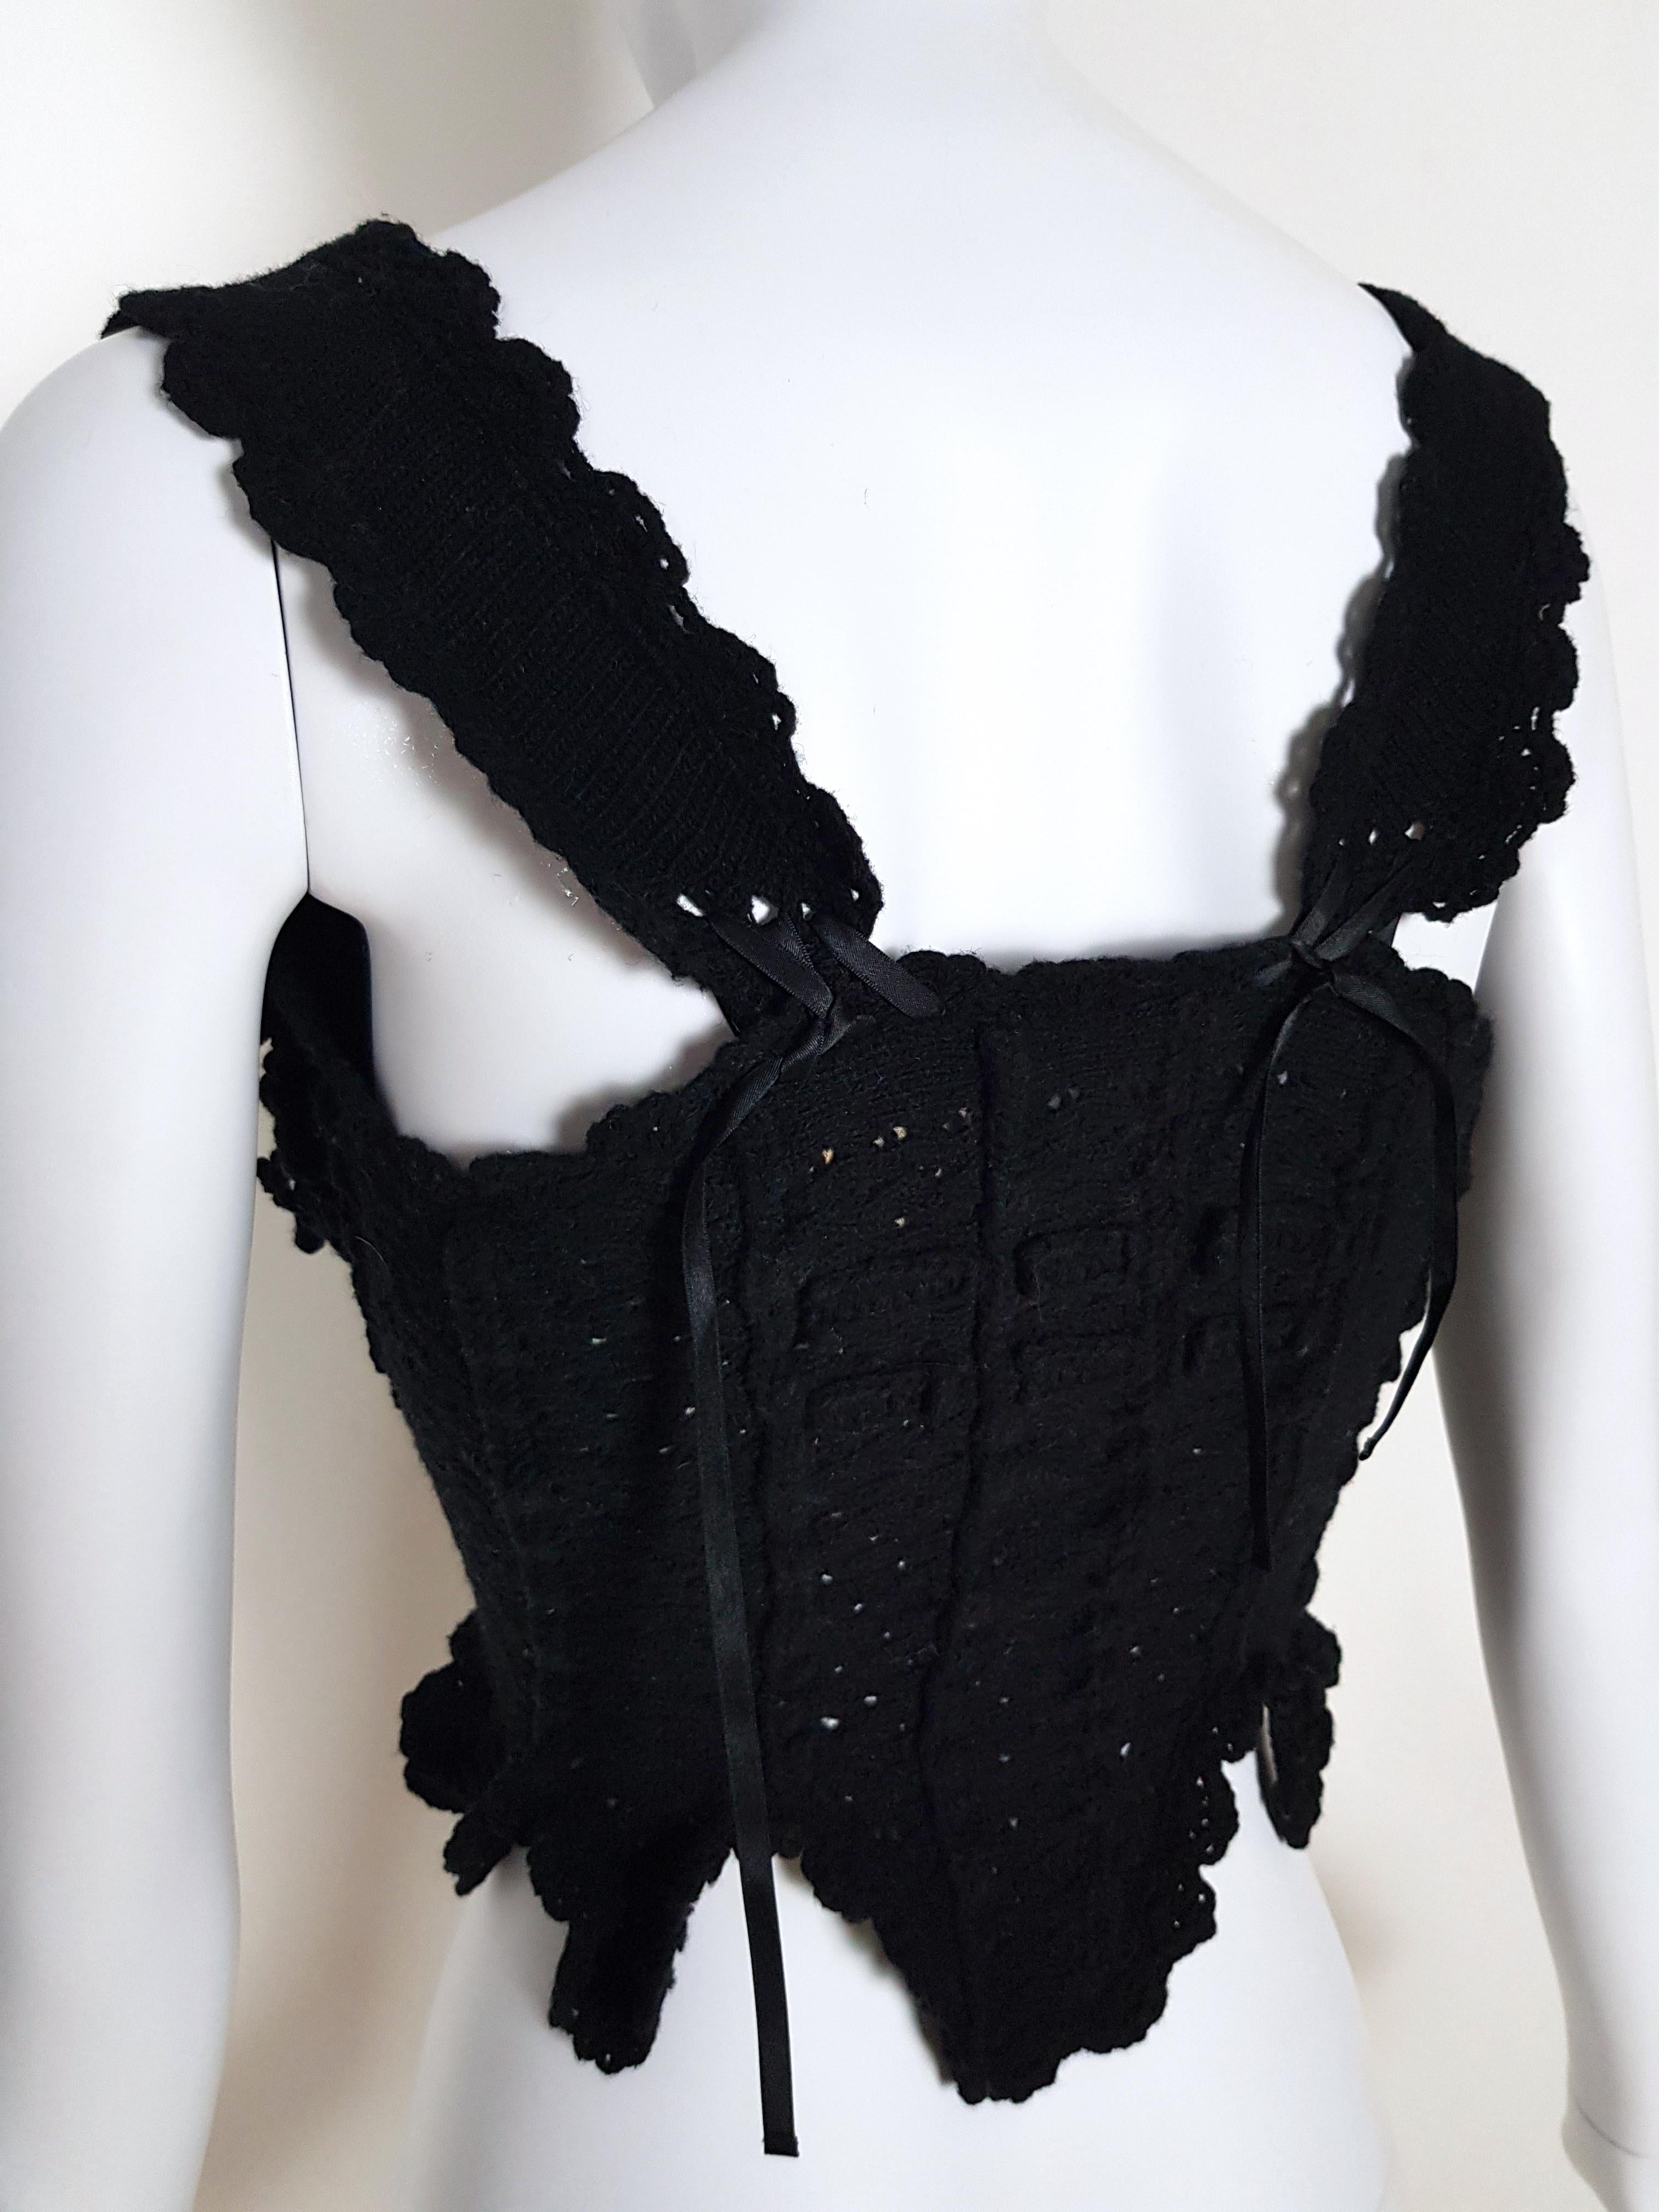 Women's TAO comme des Garcons wool knitted victorian Corset, c. 2006